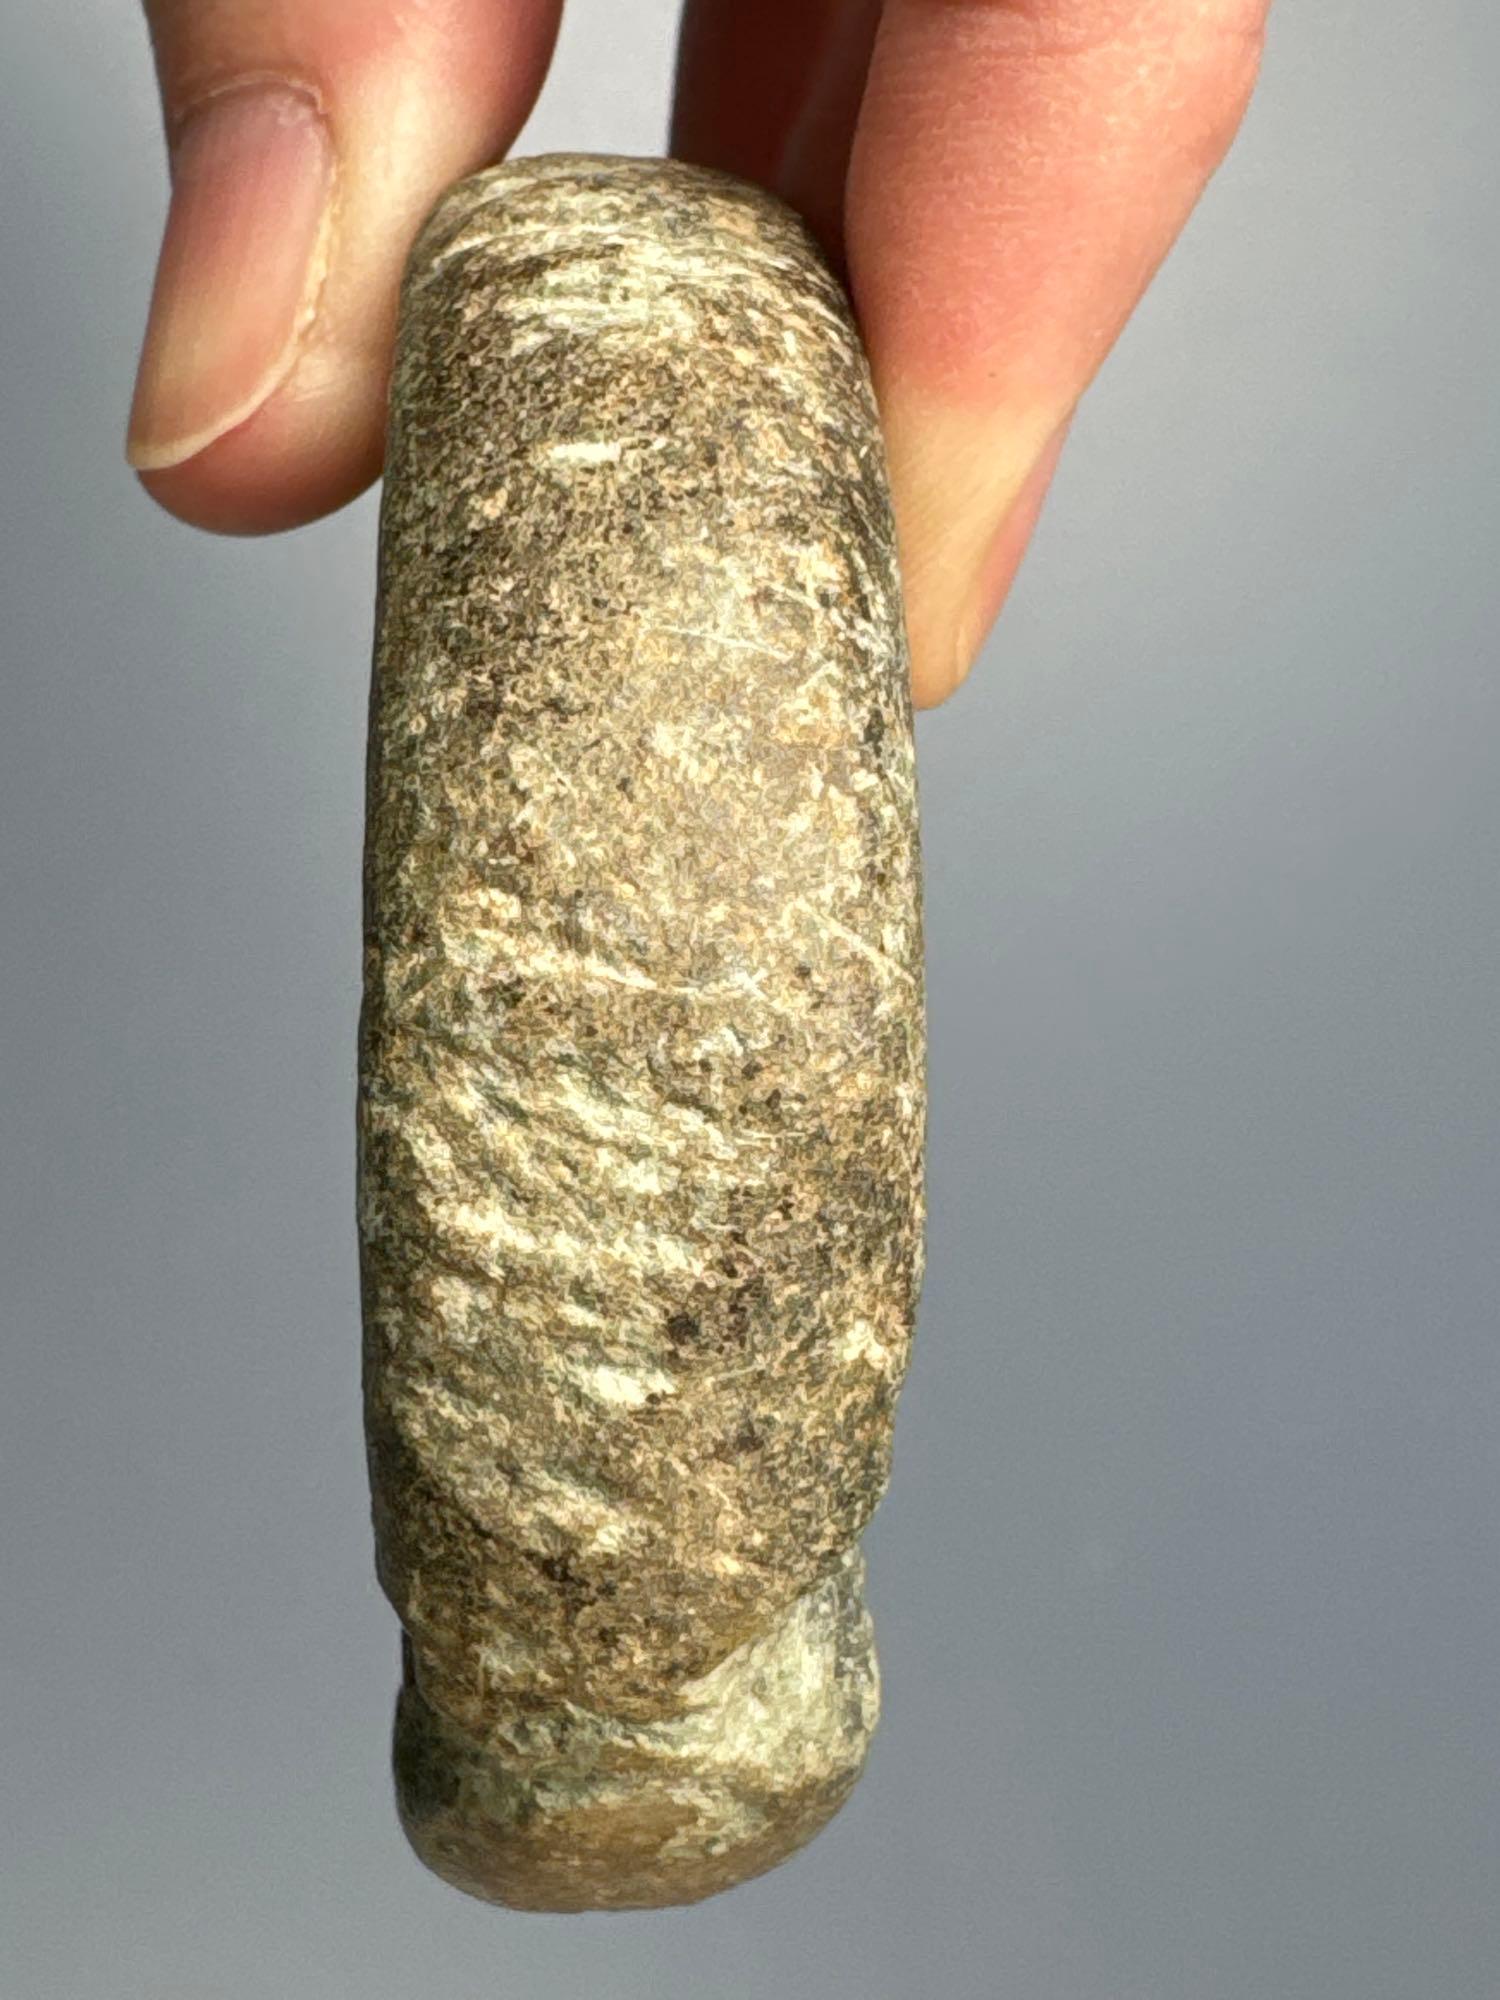 SUPERB 2 5/8" Steatite Discoidal, Perforated, Found in New Jersey (interesting style for the area),